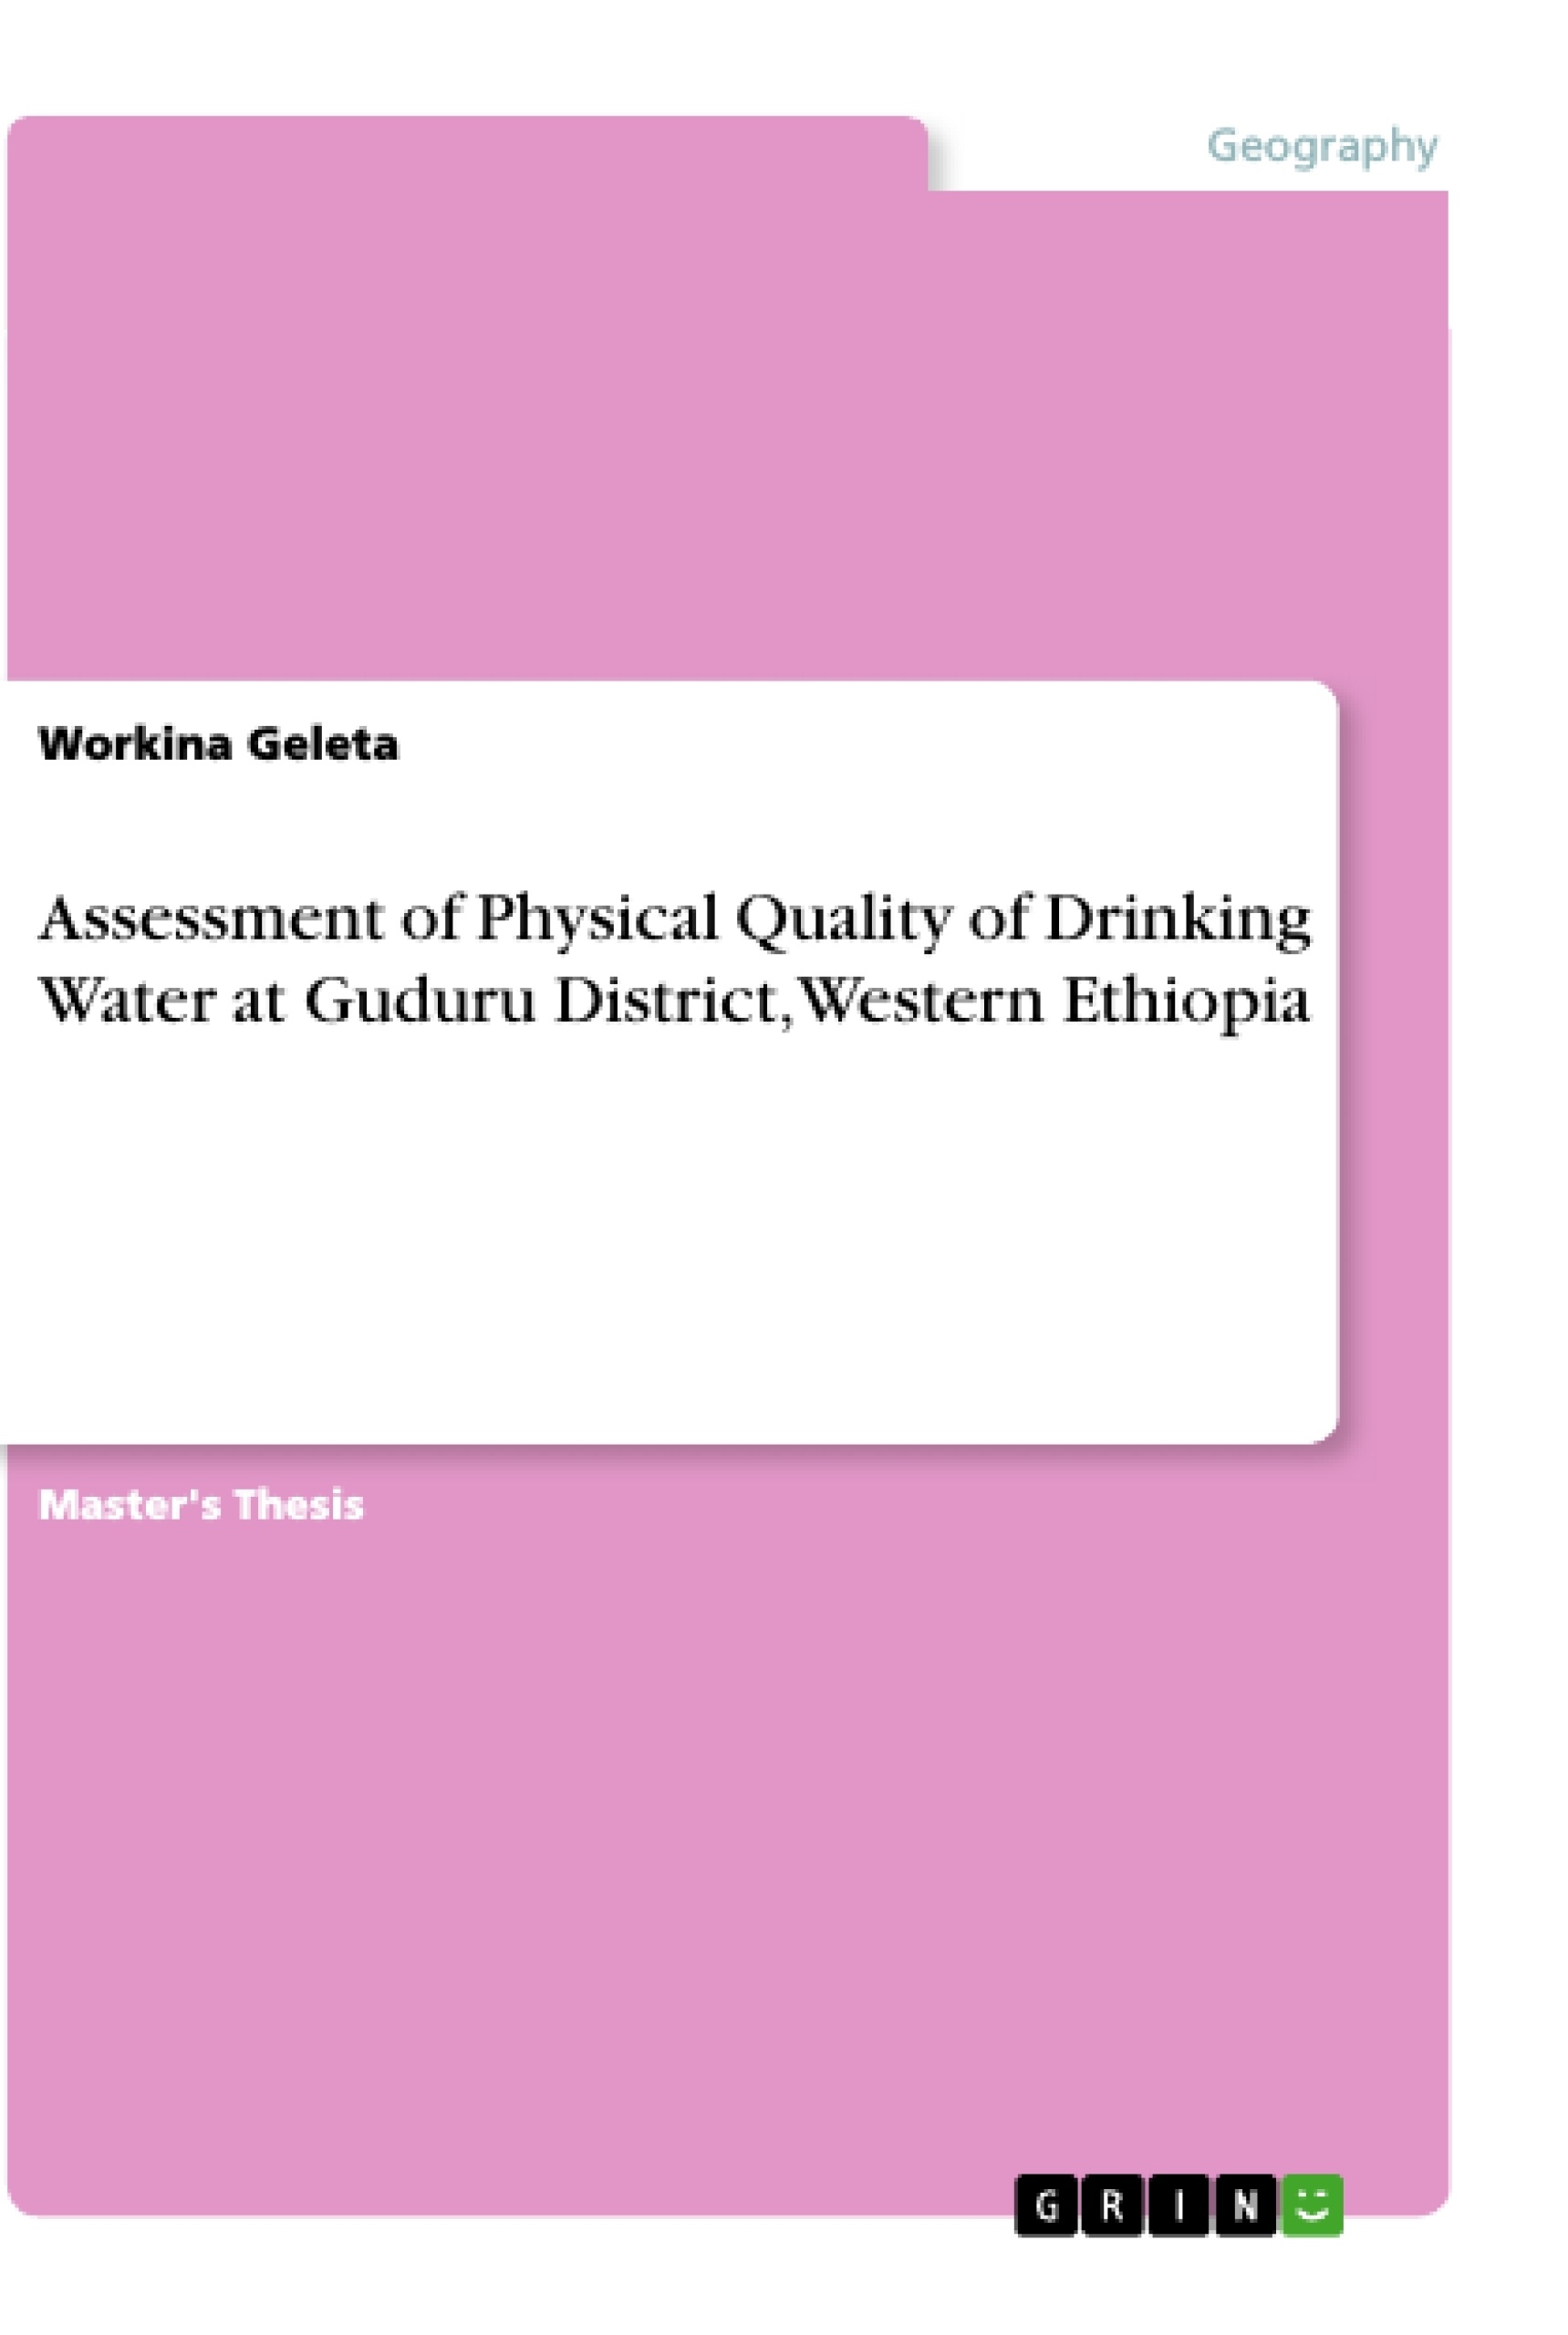 Title: Assessment of Physical Quality of Drinking Water at Guduru District, Western Ethiopia